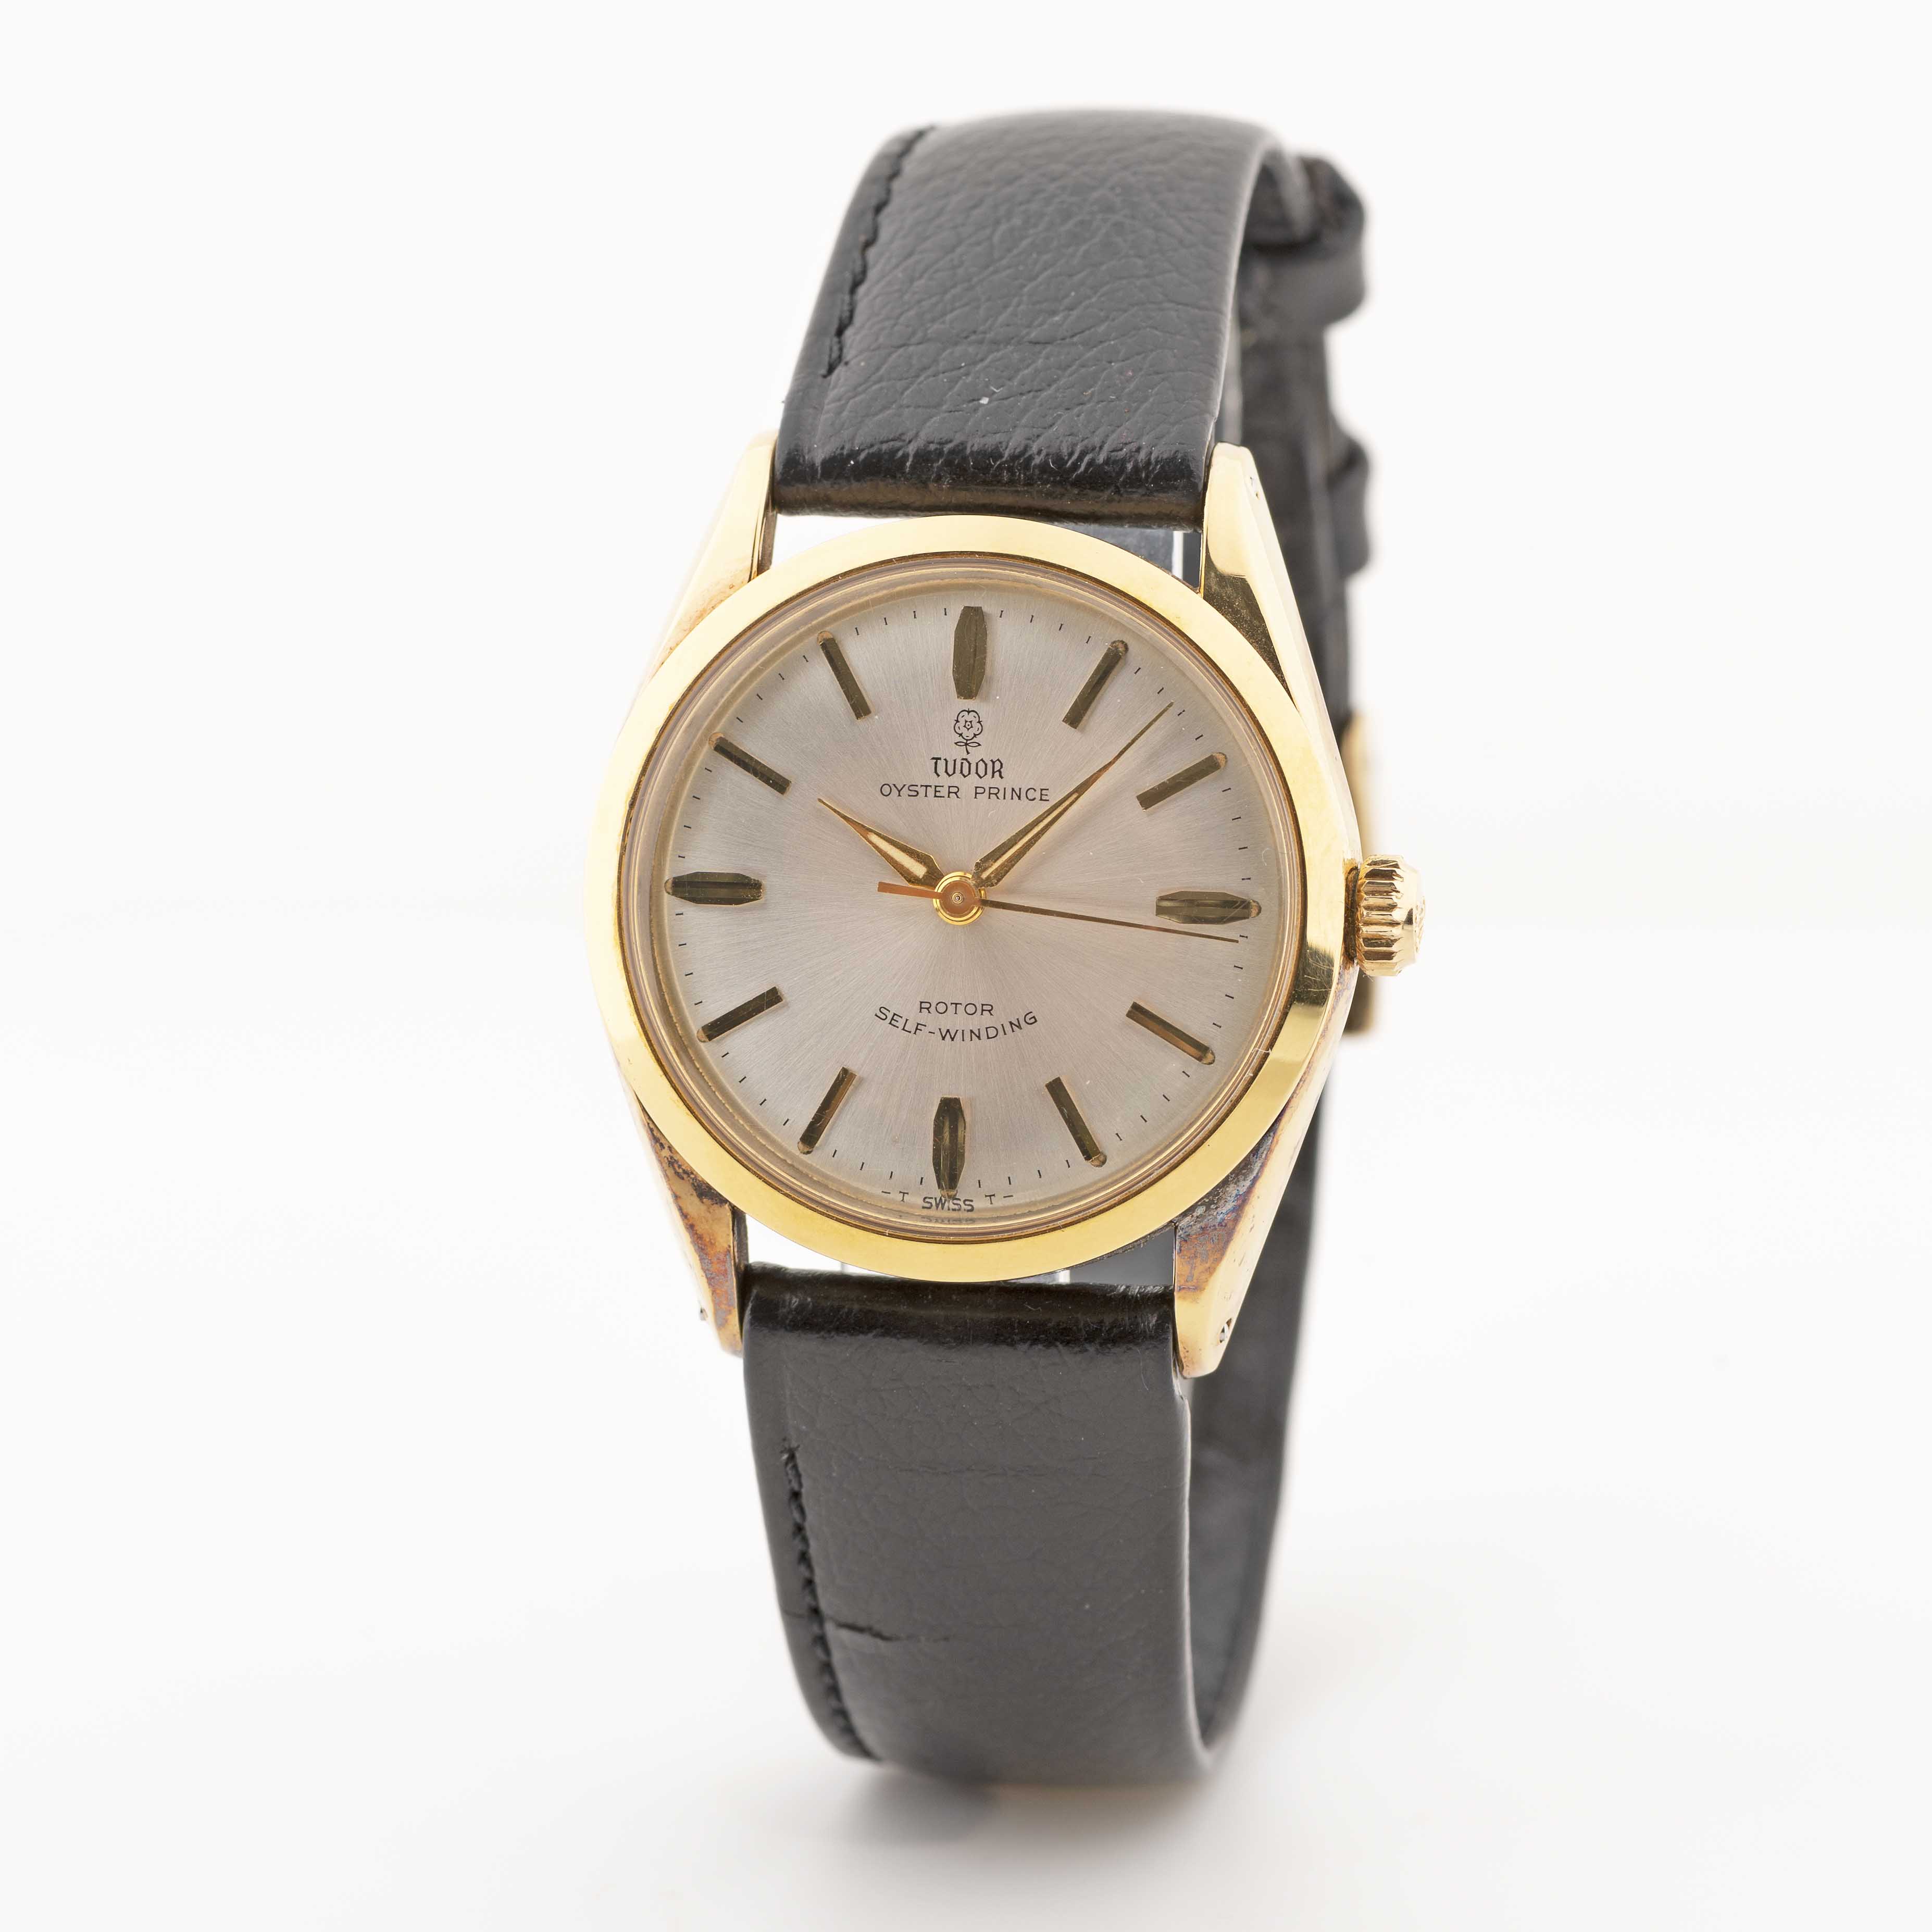 A GENTLEMAN'S GOLD PLATED TUDOR OYSTER PRINCE SELF WINDING WRIST WATCH DATED 1970, REF. 7965 WITH - Image 4 of 12